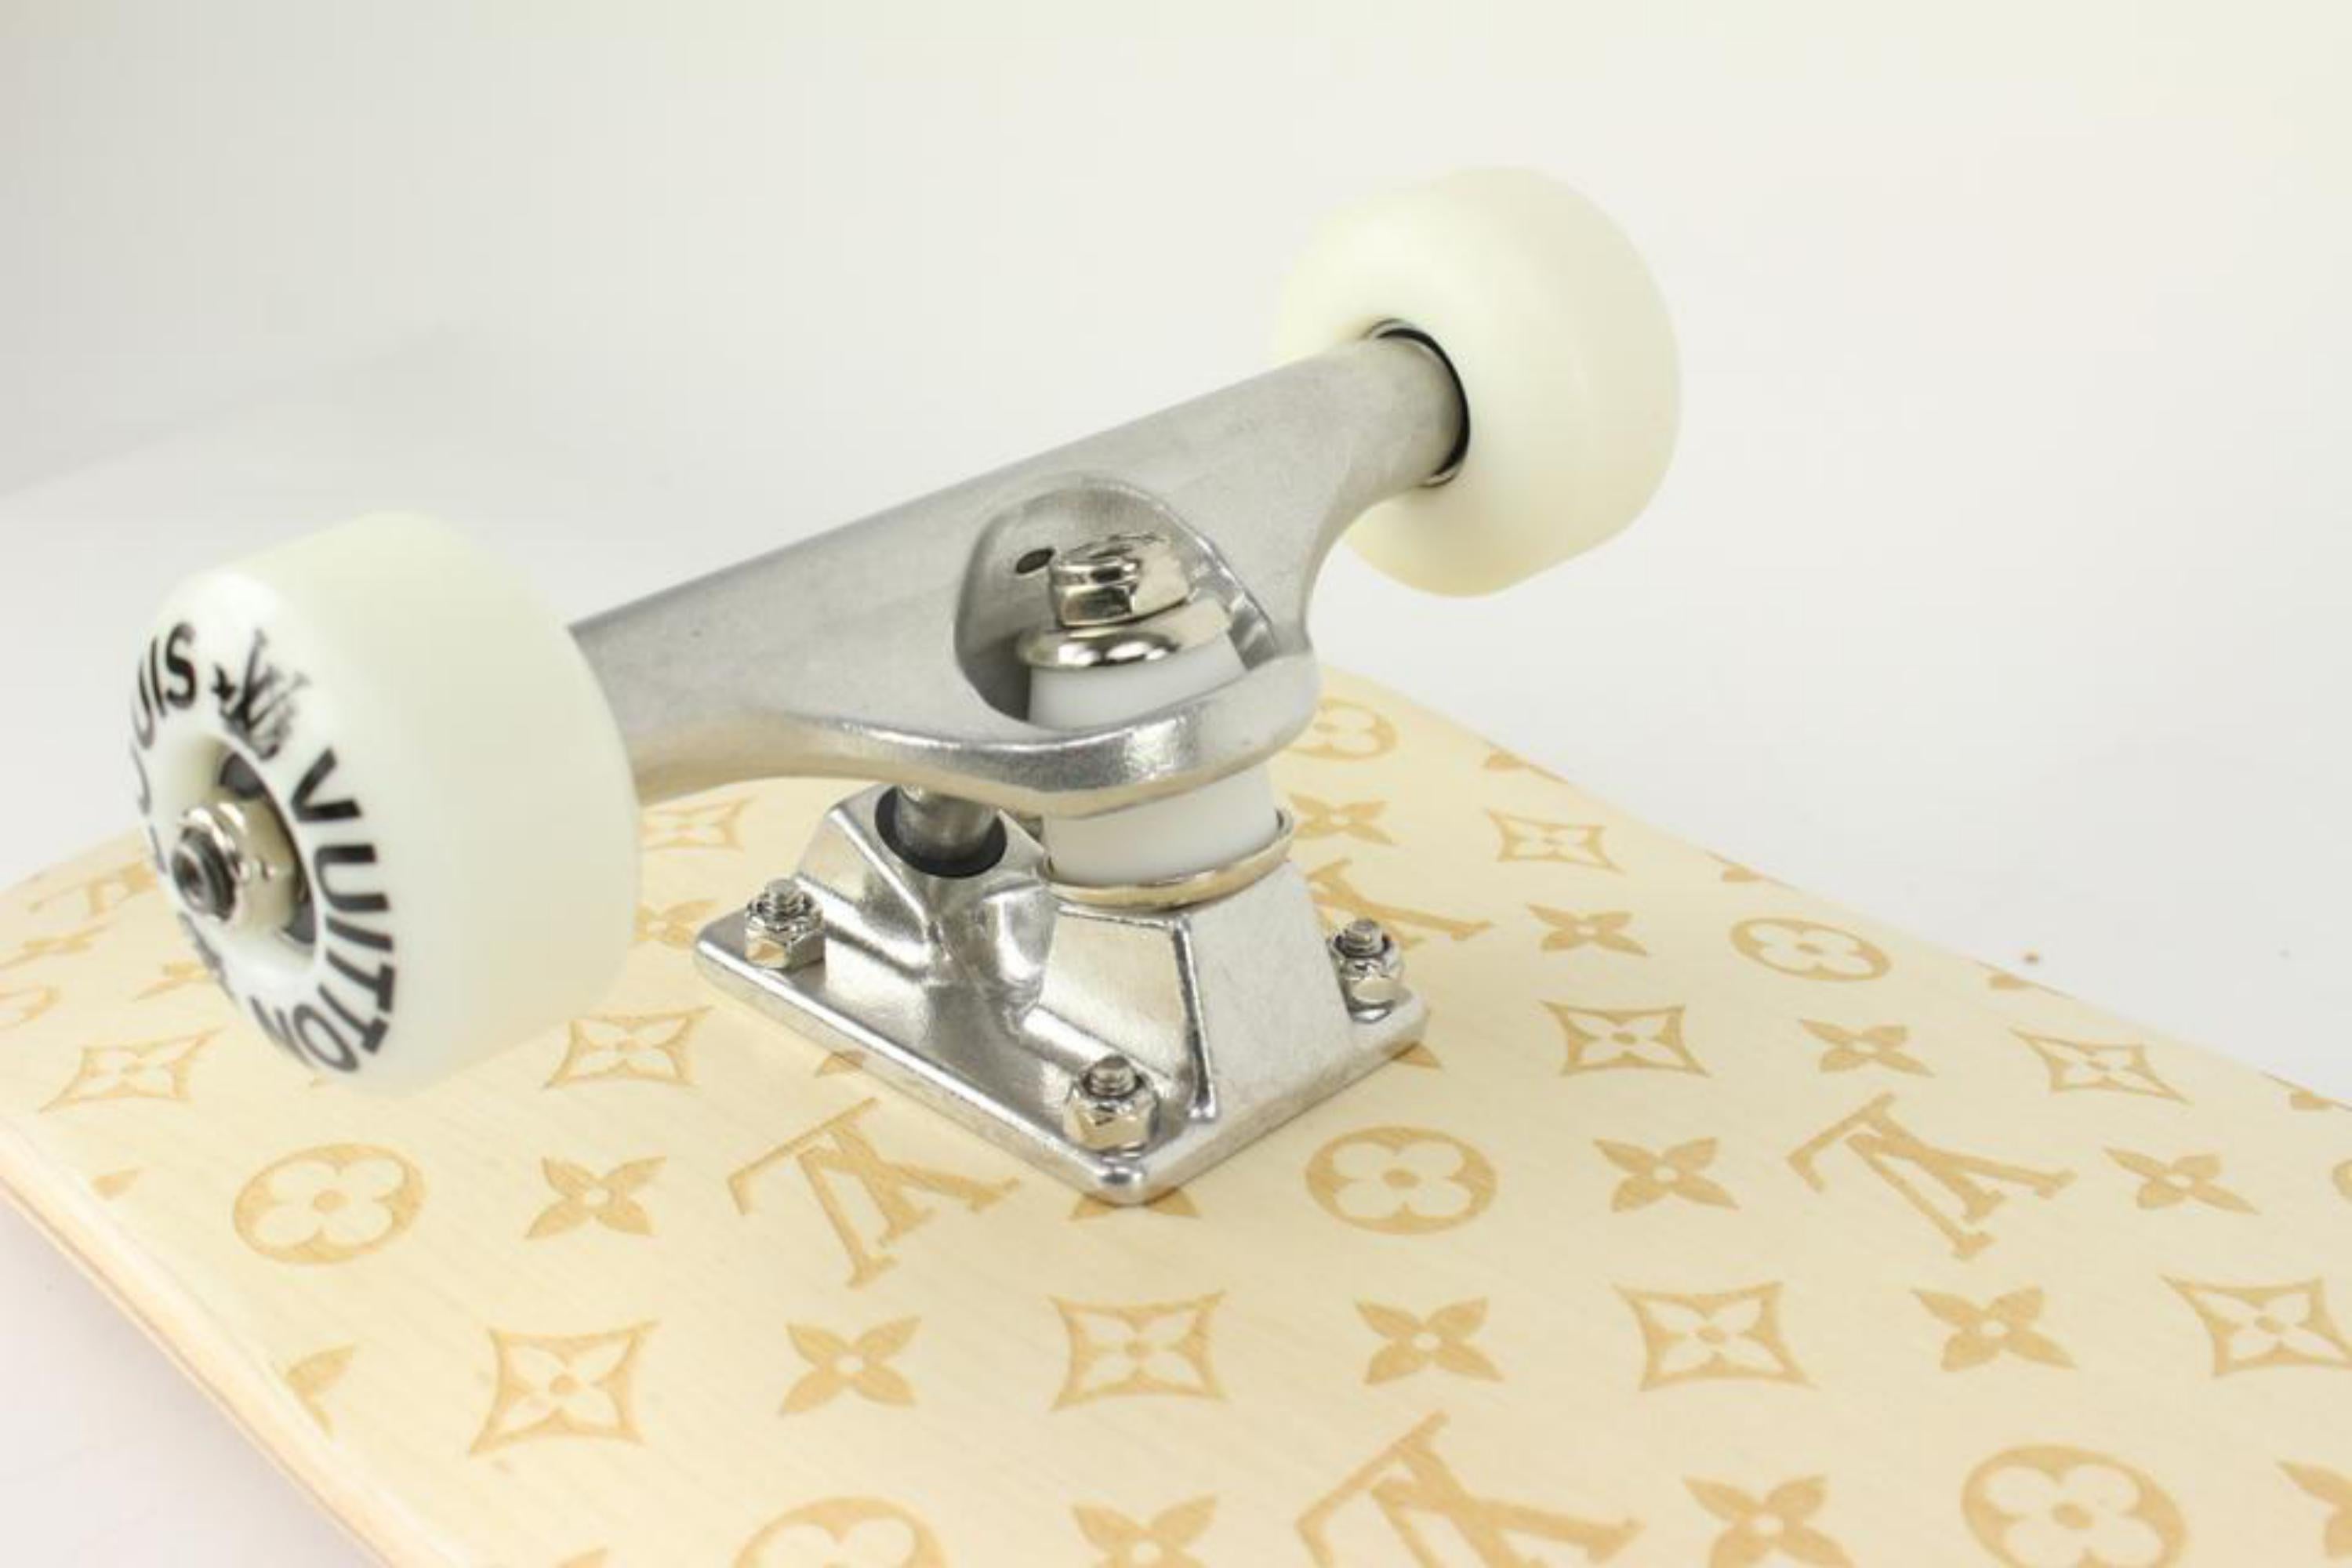 Louis Vuitton ss21 Virgil Abloh Monogram LV Skateboard 1LV1129 In New Condition For Sale In Dix hills, NY